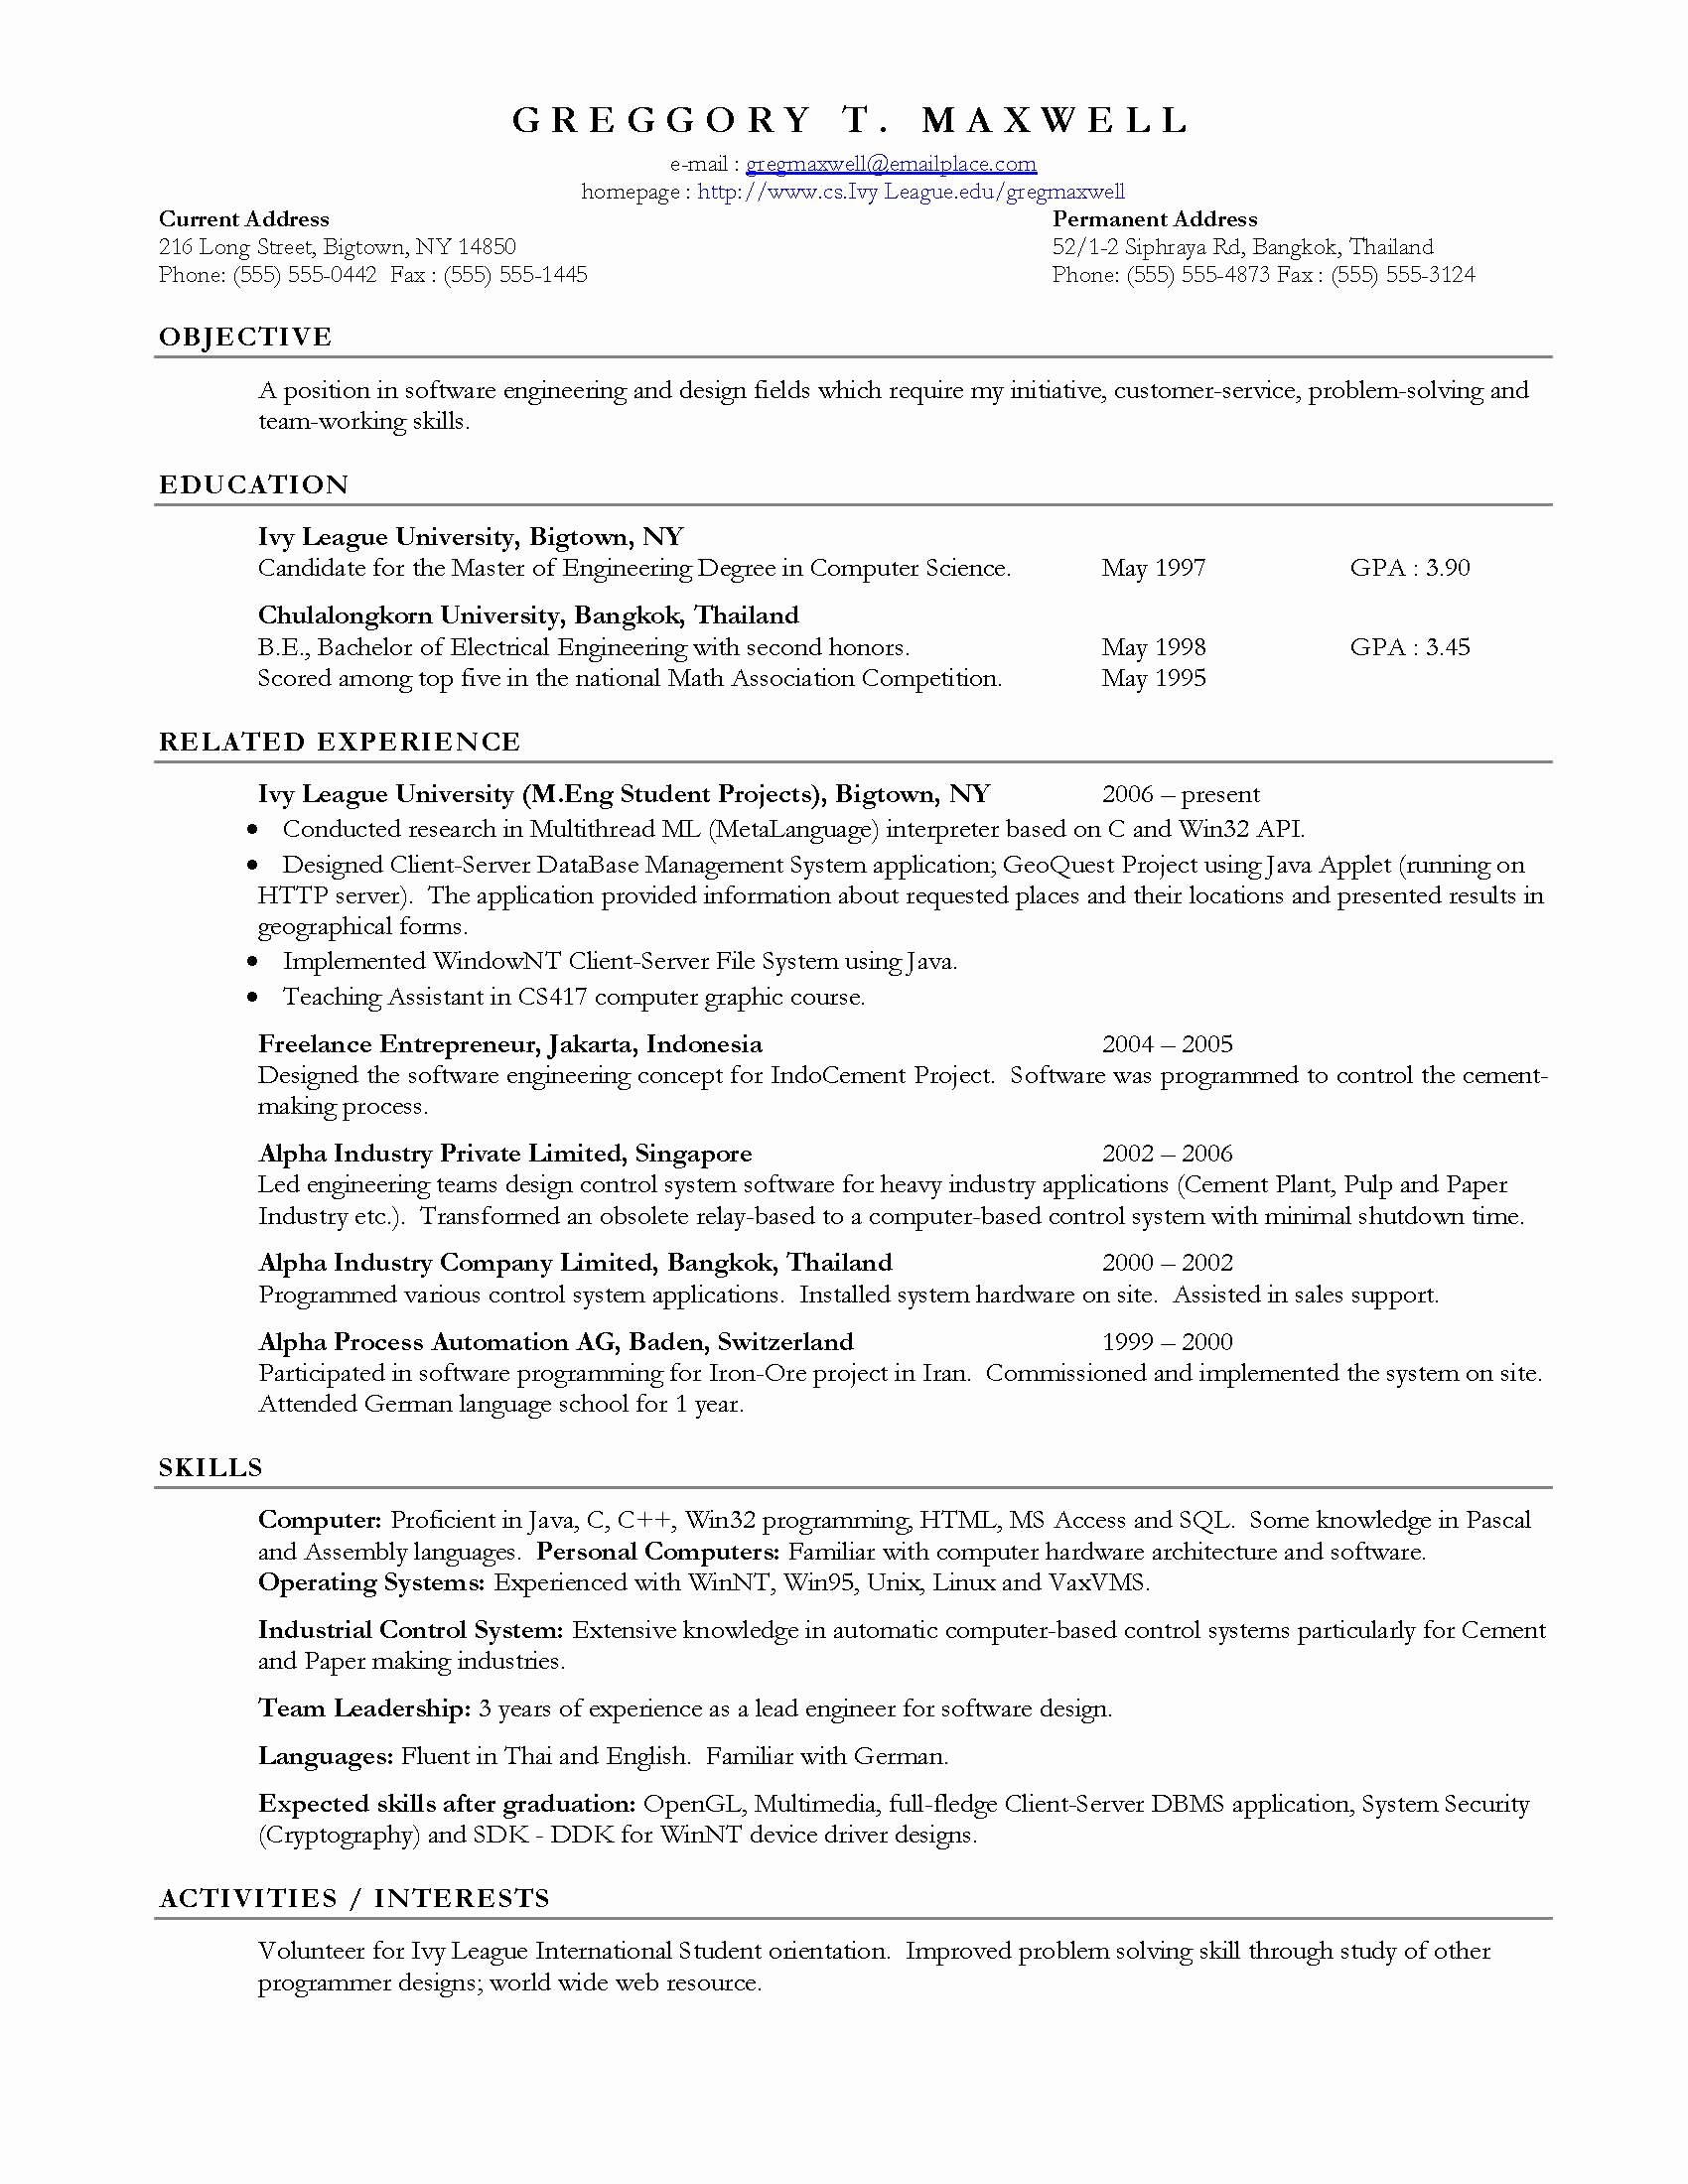 Software Engineer Resume Objective Statement Resume Ideas